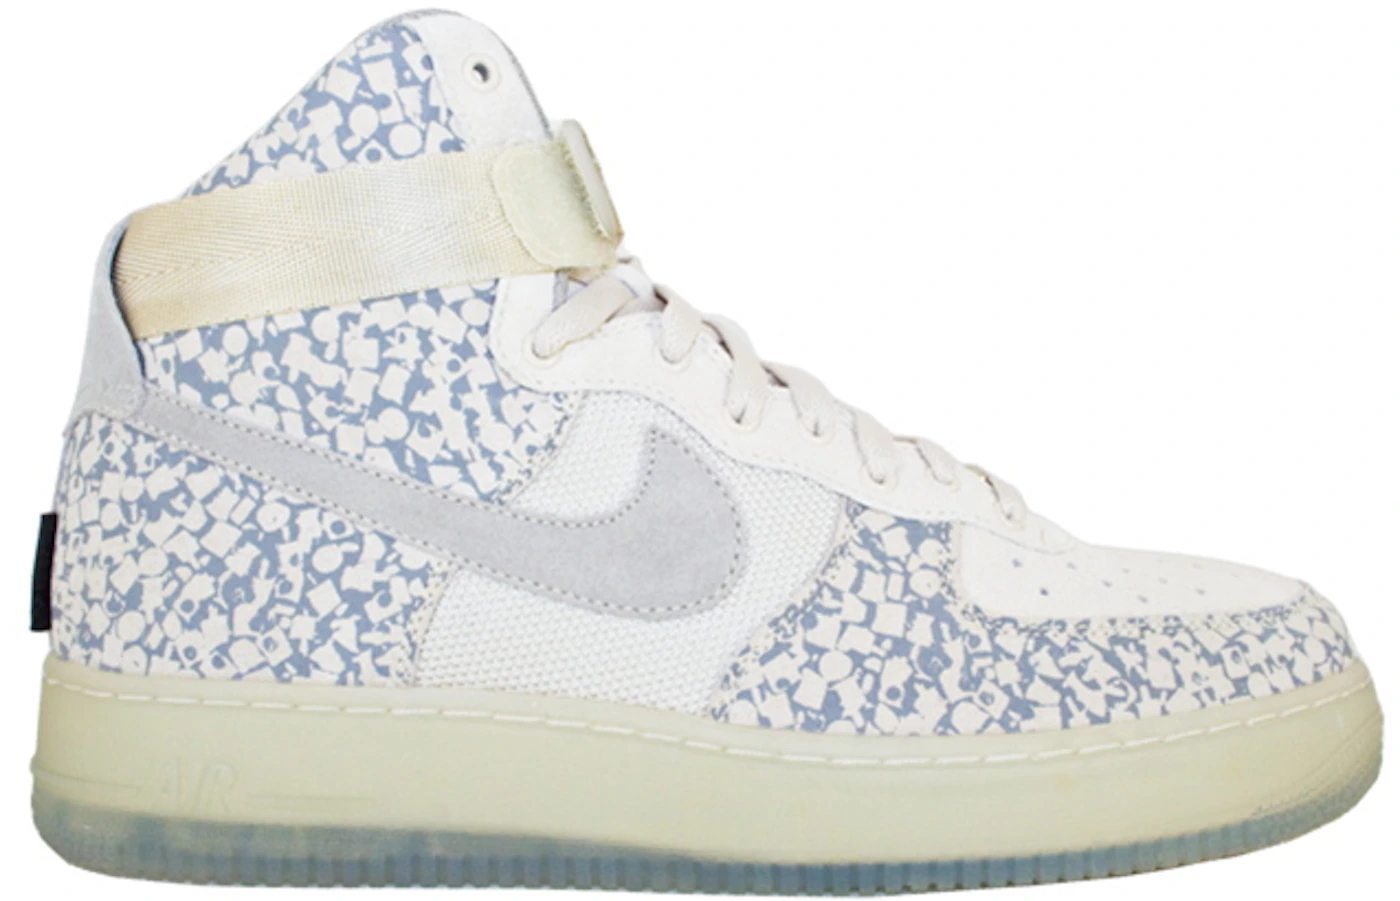 Nike Air Force 1 Stash One Night Only - FA07-ND-I8M, 307064-001, 307064-002, -